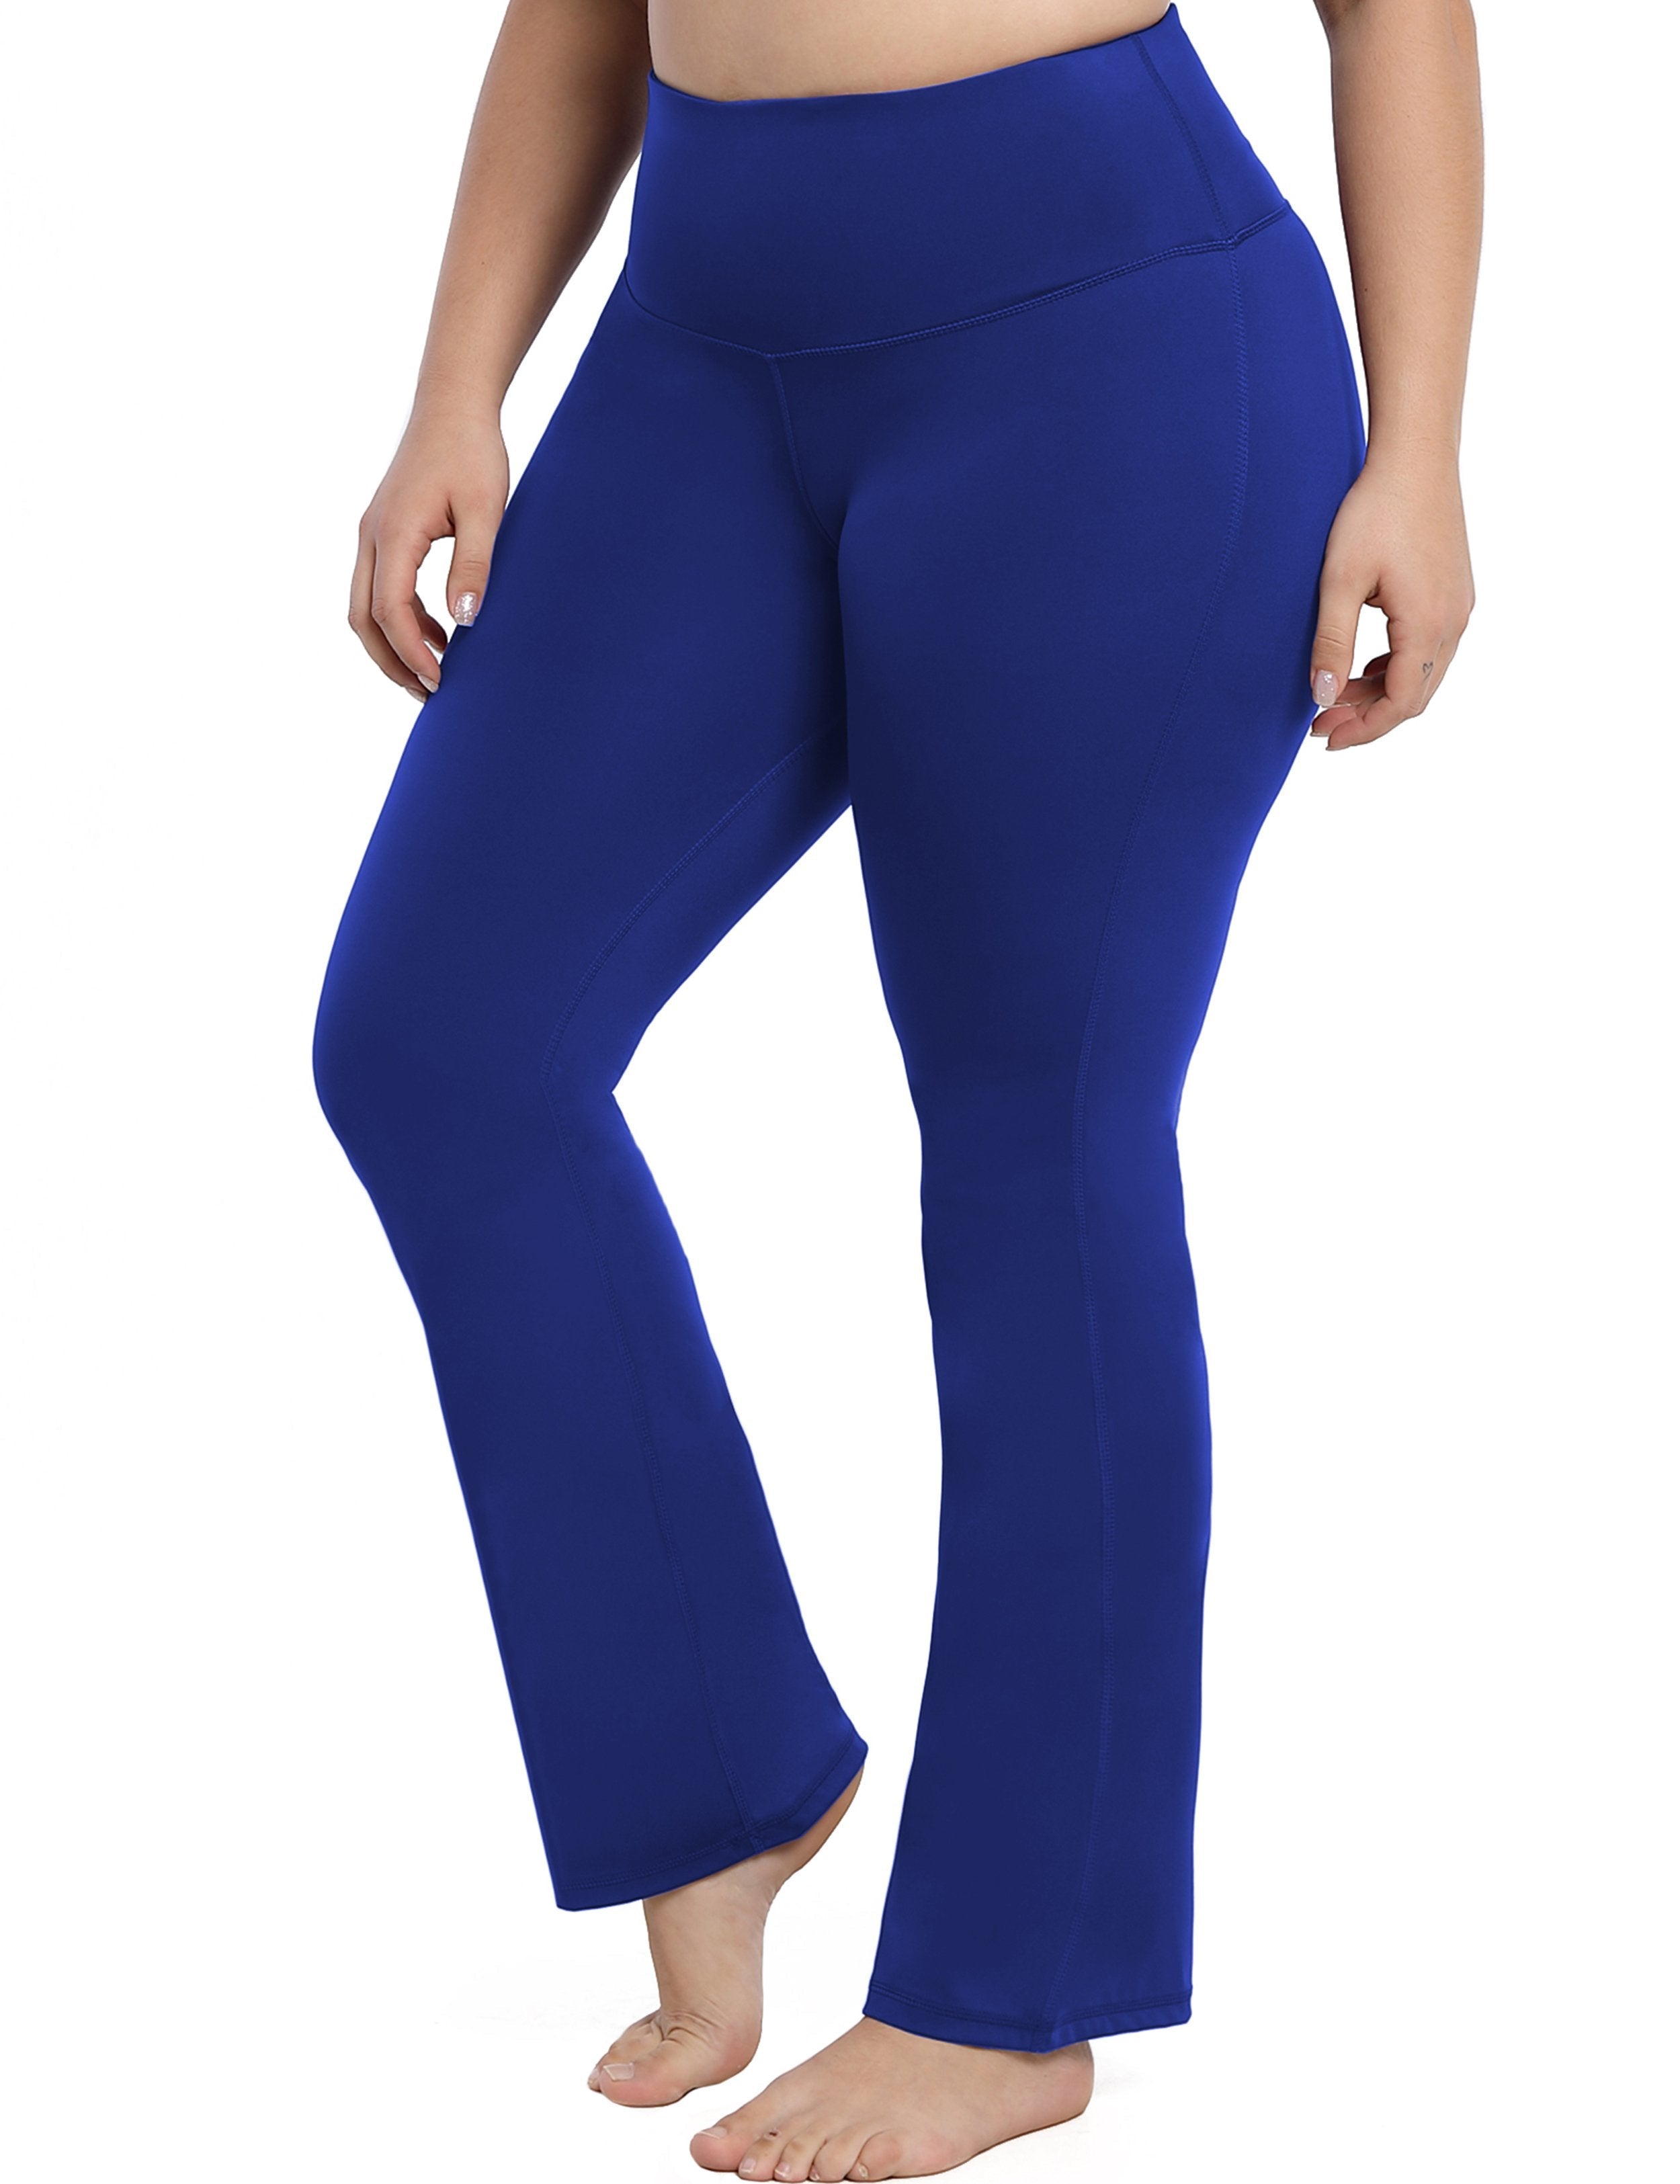 High Waist Bootcut Leggings Navy 75%Nylon/25%Spandex Fabric doesn't attract lint easily 4-way stretch No see-through Moisture-wicking Tummy control Inner pocket Five lengths